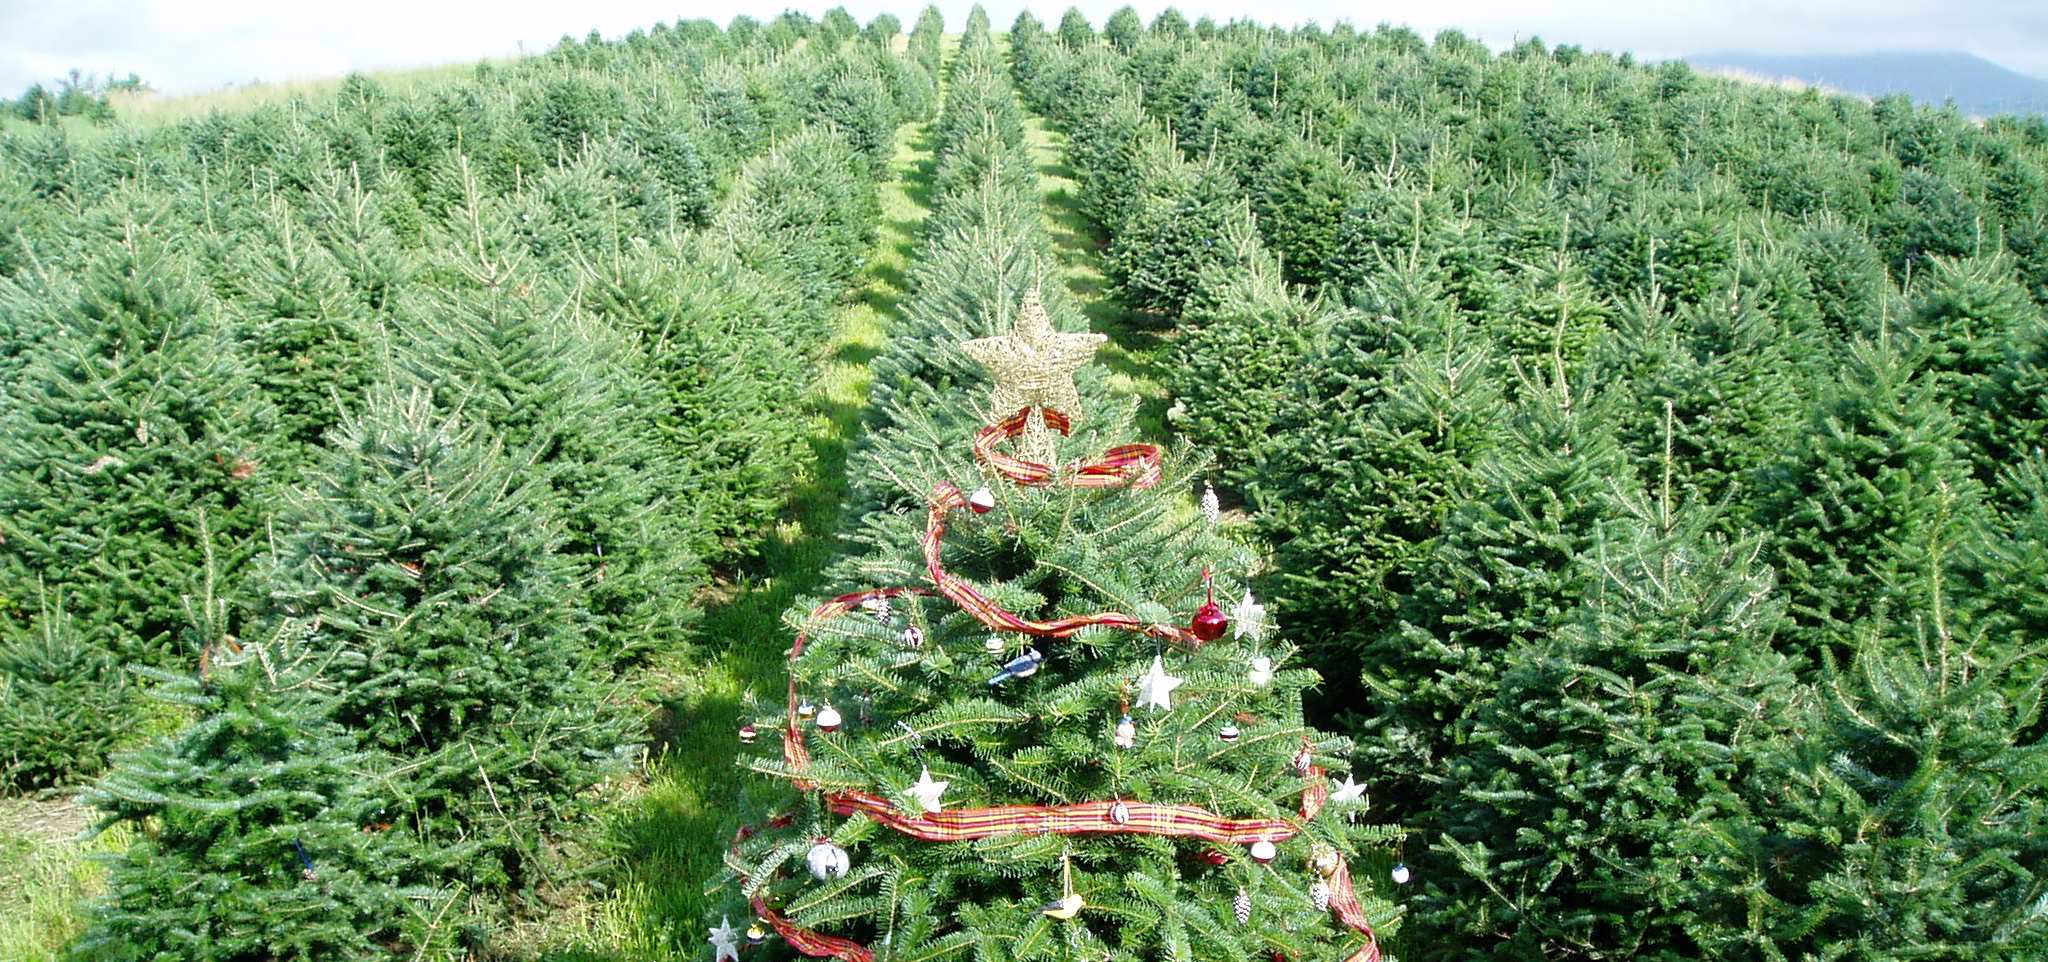 A Christmas tree amidst rows of other growing trees stands out with decorations.